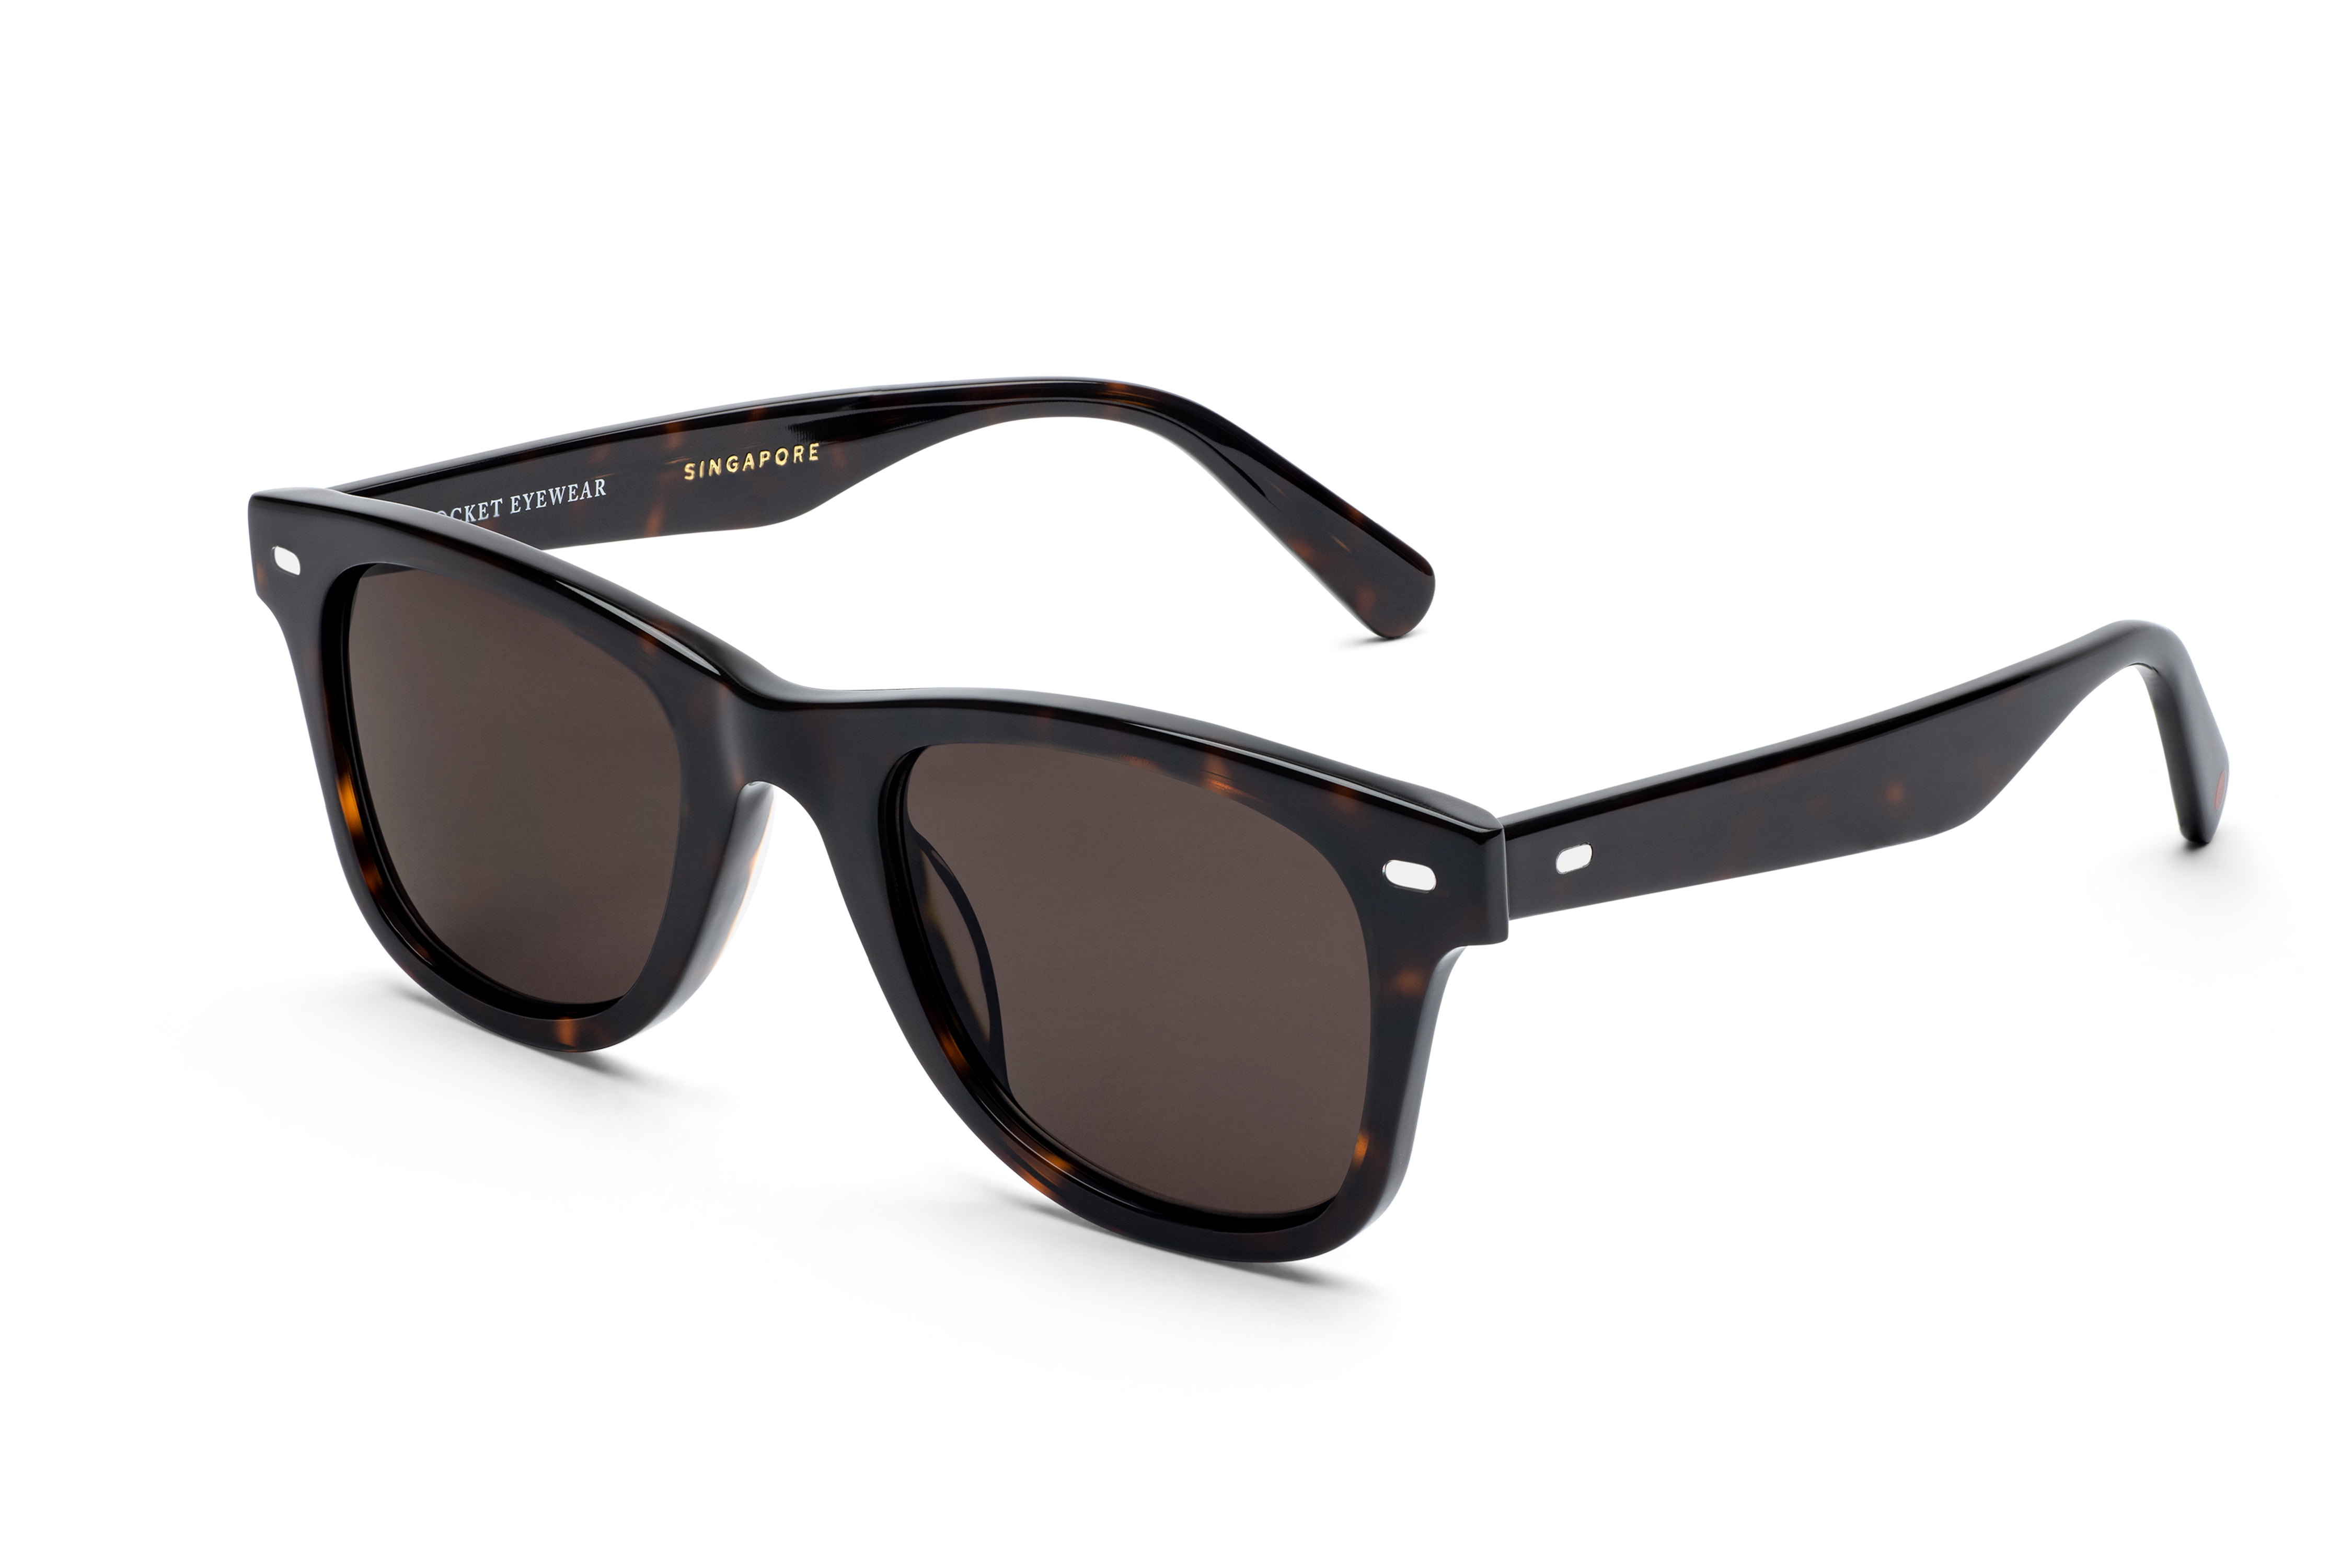 Rocket Eyewear SPT Classic Mahogany Tortoise with Brown Polarized Lenses (Limited Edition)